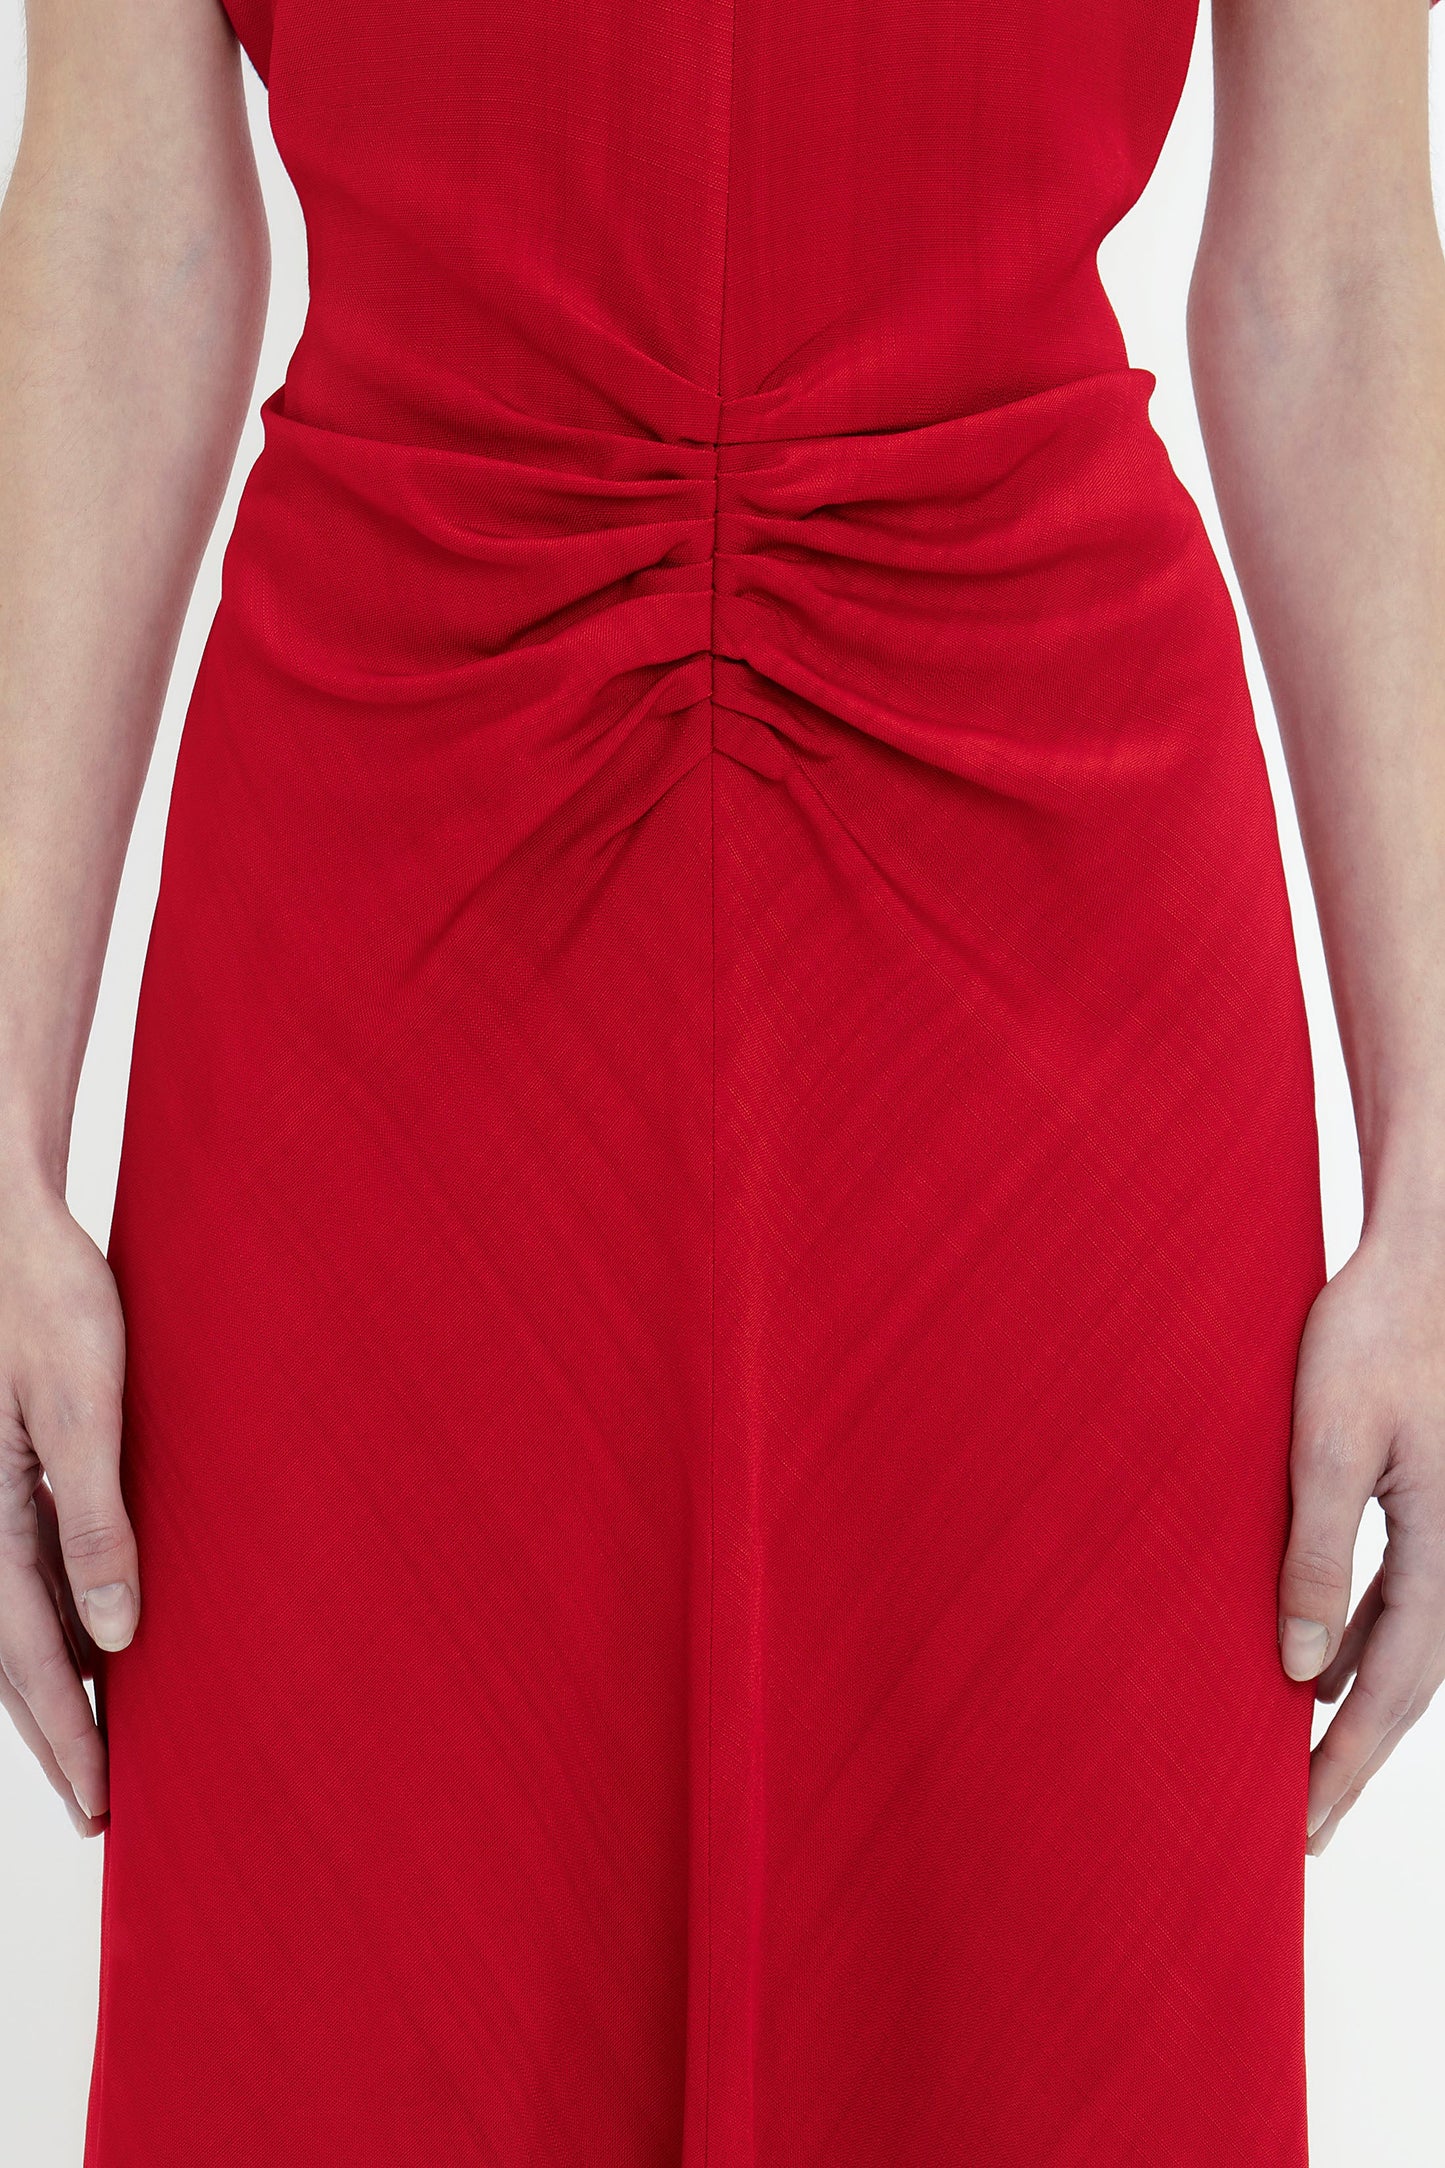 Close-up of a person wearing a red Exclusive Gathered Waist Midi Dress In Carmine by Victoria Beckham, with ruched detailing around the waist, arms resting by sides.